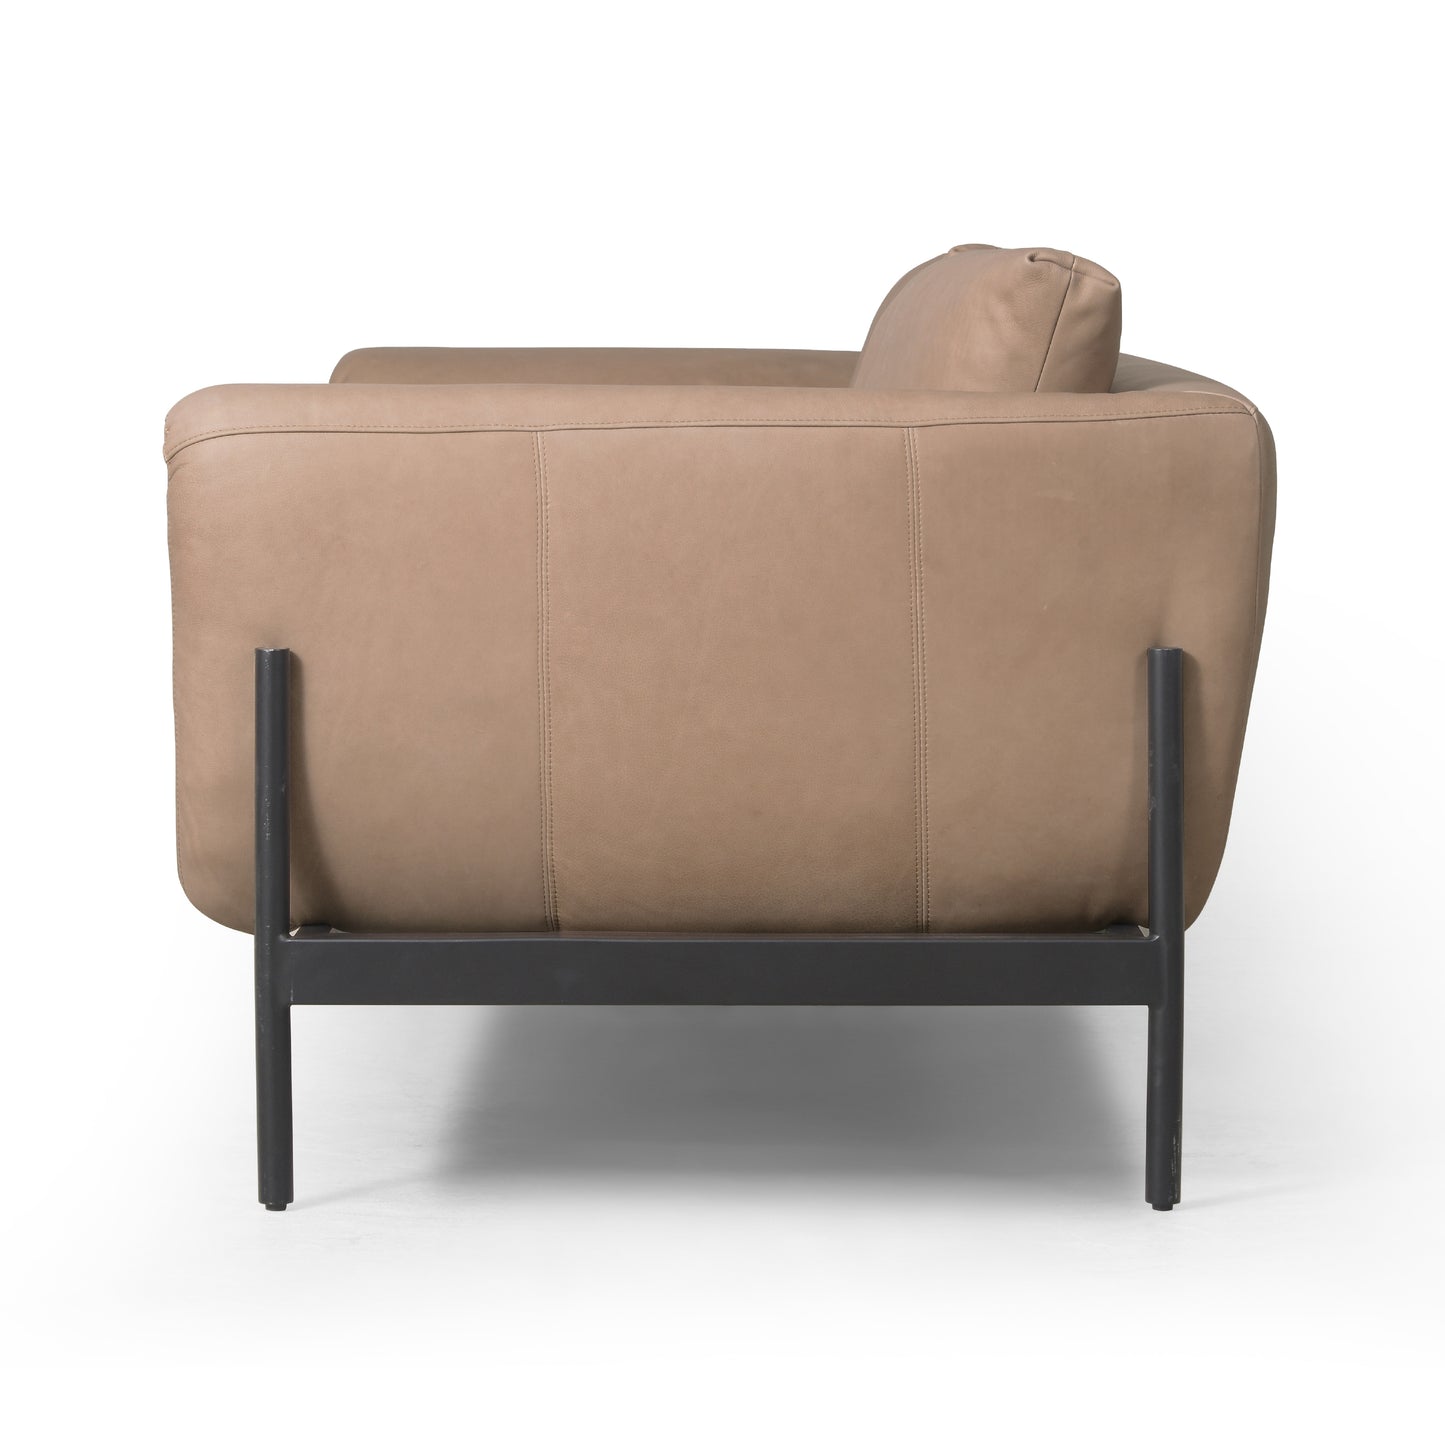 Load image into Gallery viewer, Jenkins Sofa Sofa Four Hands     Four Hands, Mid Century Modern Furniture, Old Bones Furniture Company, Old Bones Co, Modern Mid Century, Designer Furniture, https://www.oldbonesco.com/
